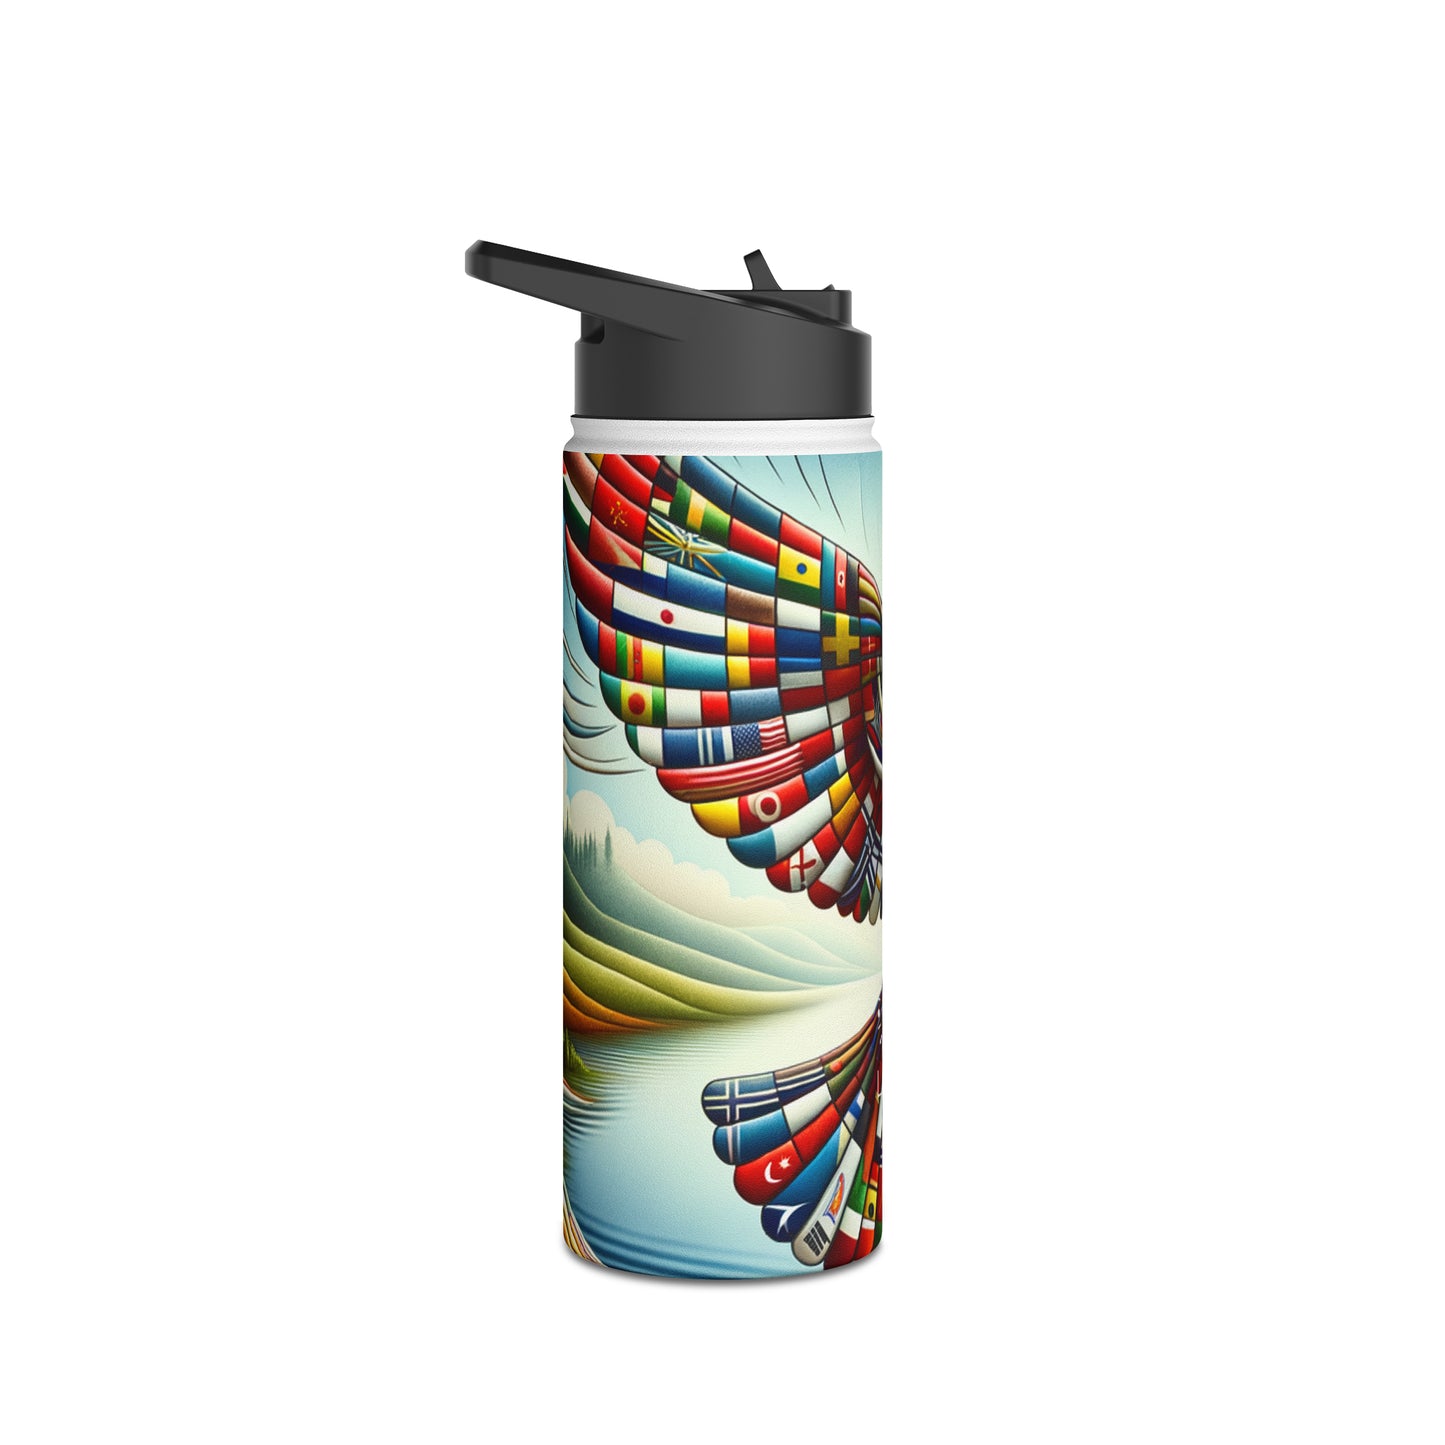 "Global Tapestry of Tranquility" - Water Bottle